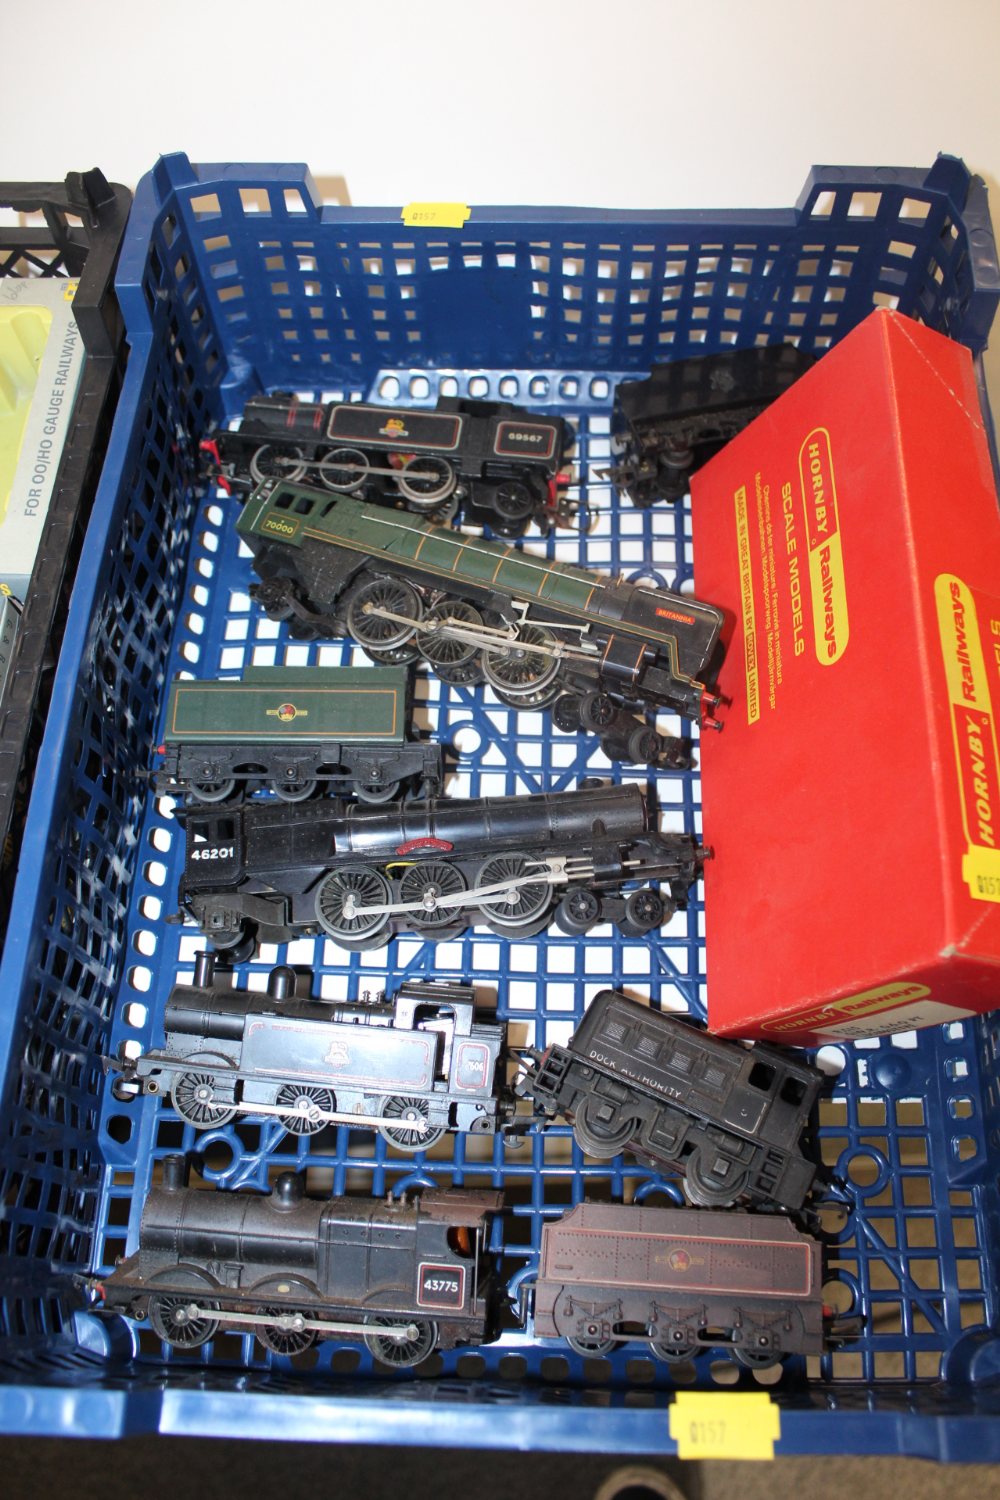 A BOX OF MODEL RAILWAY LOCOMOTIVES TO INCLUDE TRIANG AND HORNBY, TOGETHER WITH A TRAY OF PACKAGING